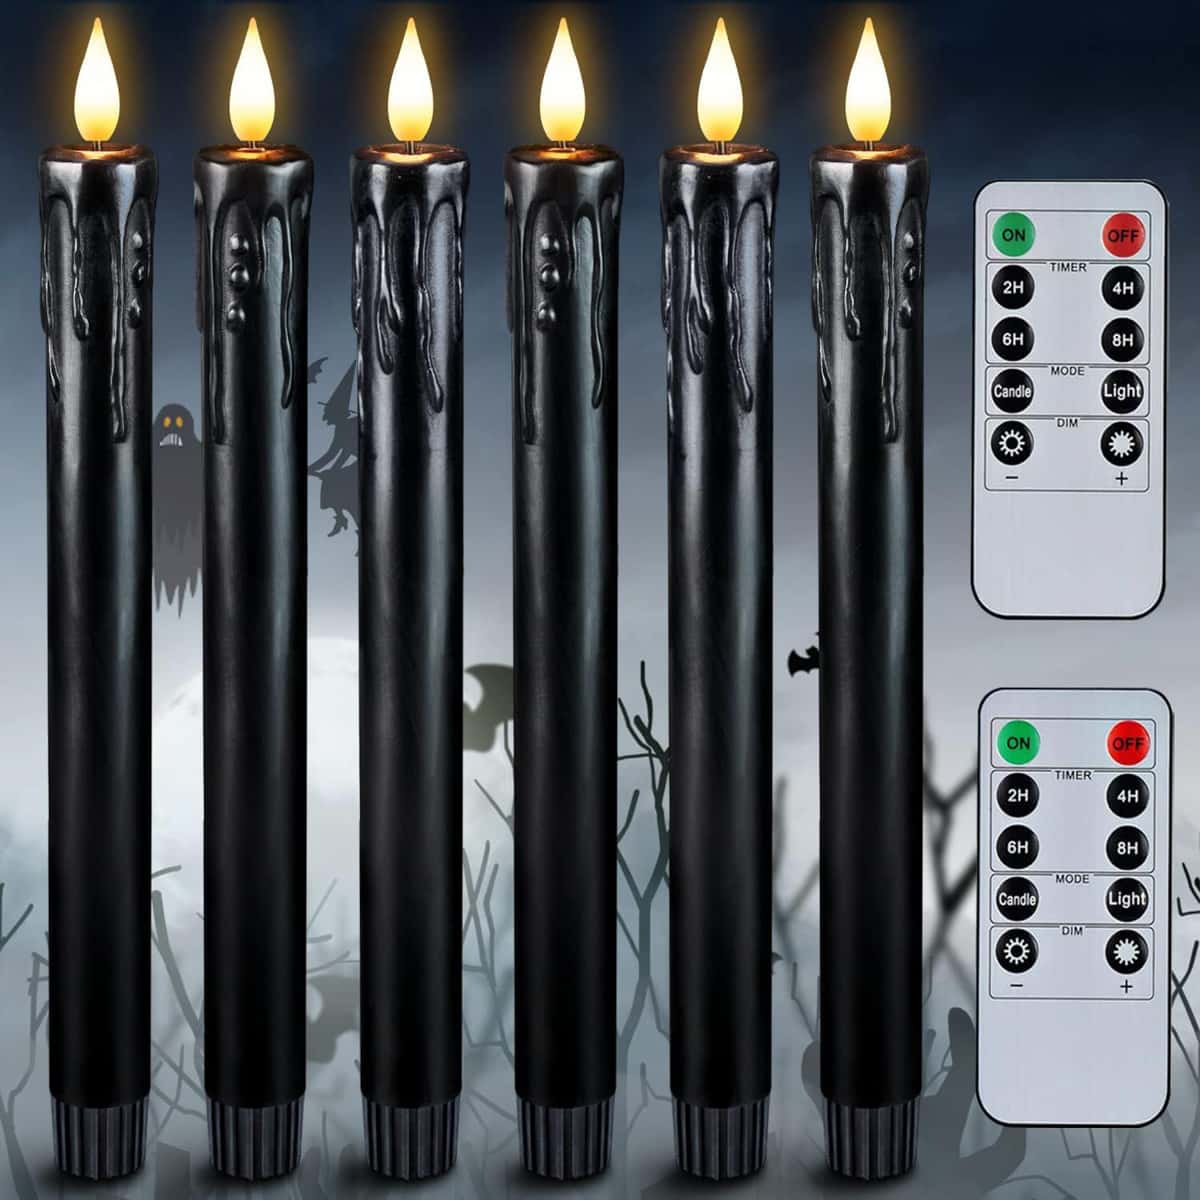 6 black flameless taper candles with remotes.